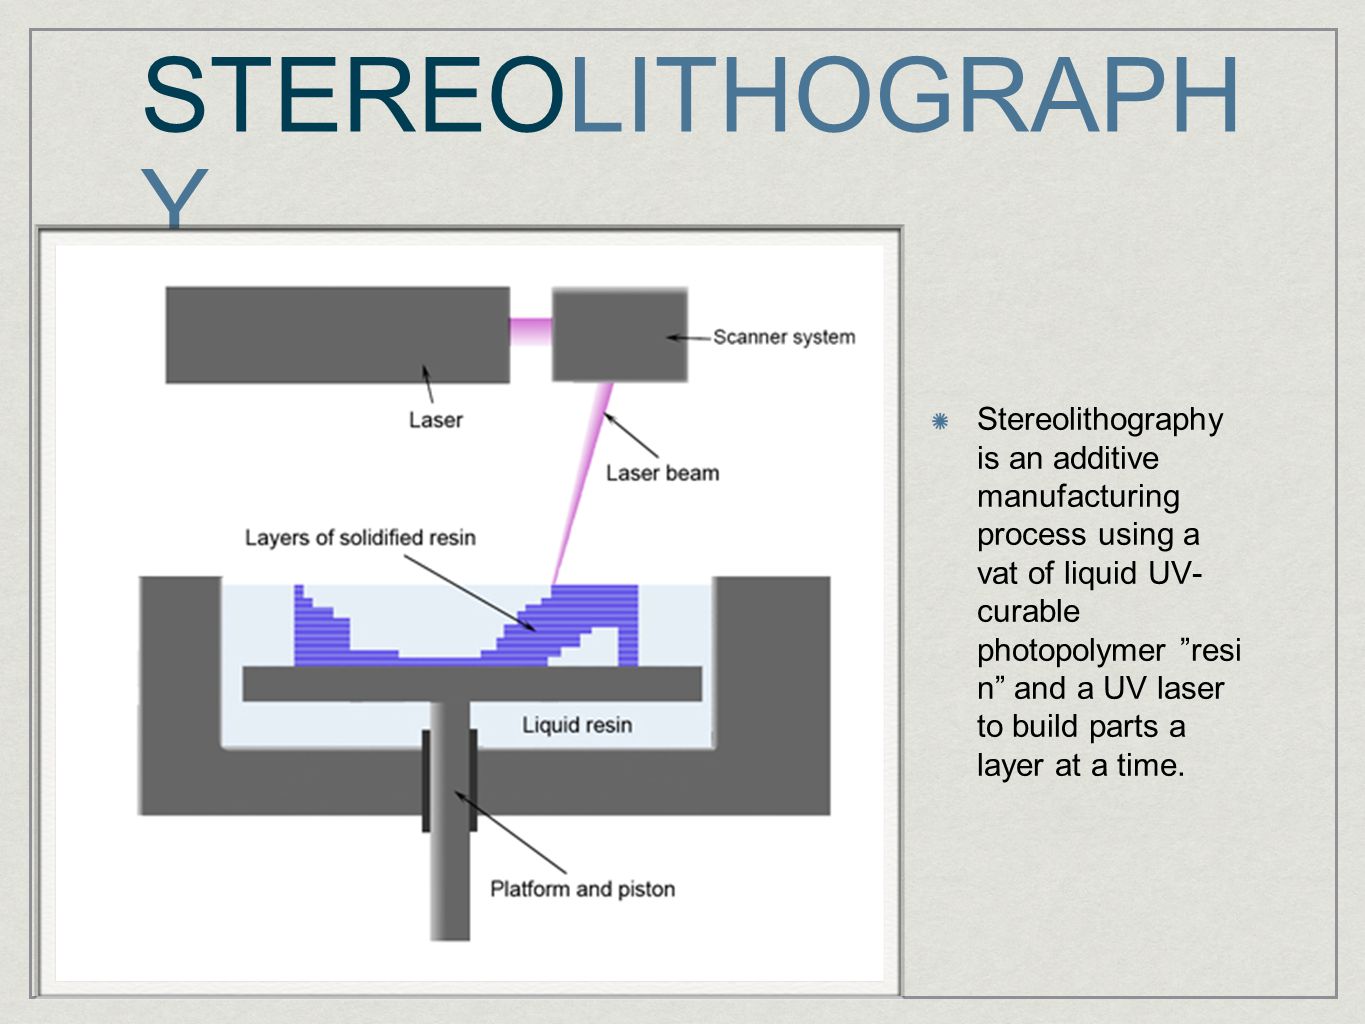 STEREOLITHOGRAPH Y Stereolithography is an additive manufacturing process using a vat of liquid UV- curable photopolymer resi n and a UV laser to build parts a layer at a time.